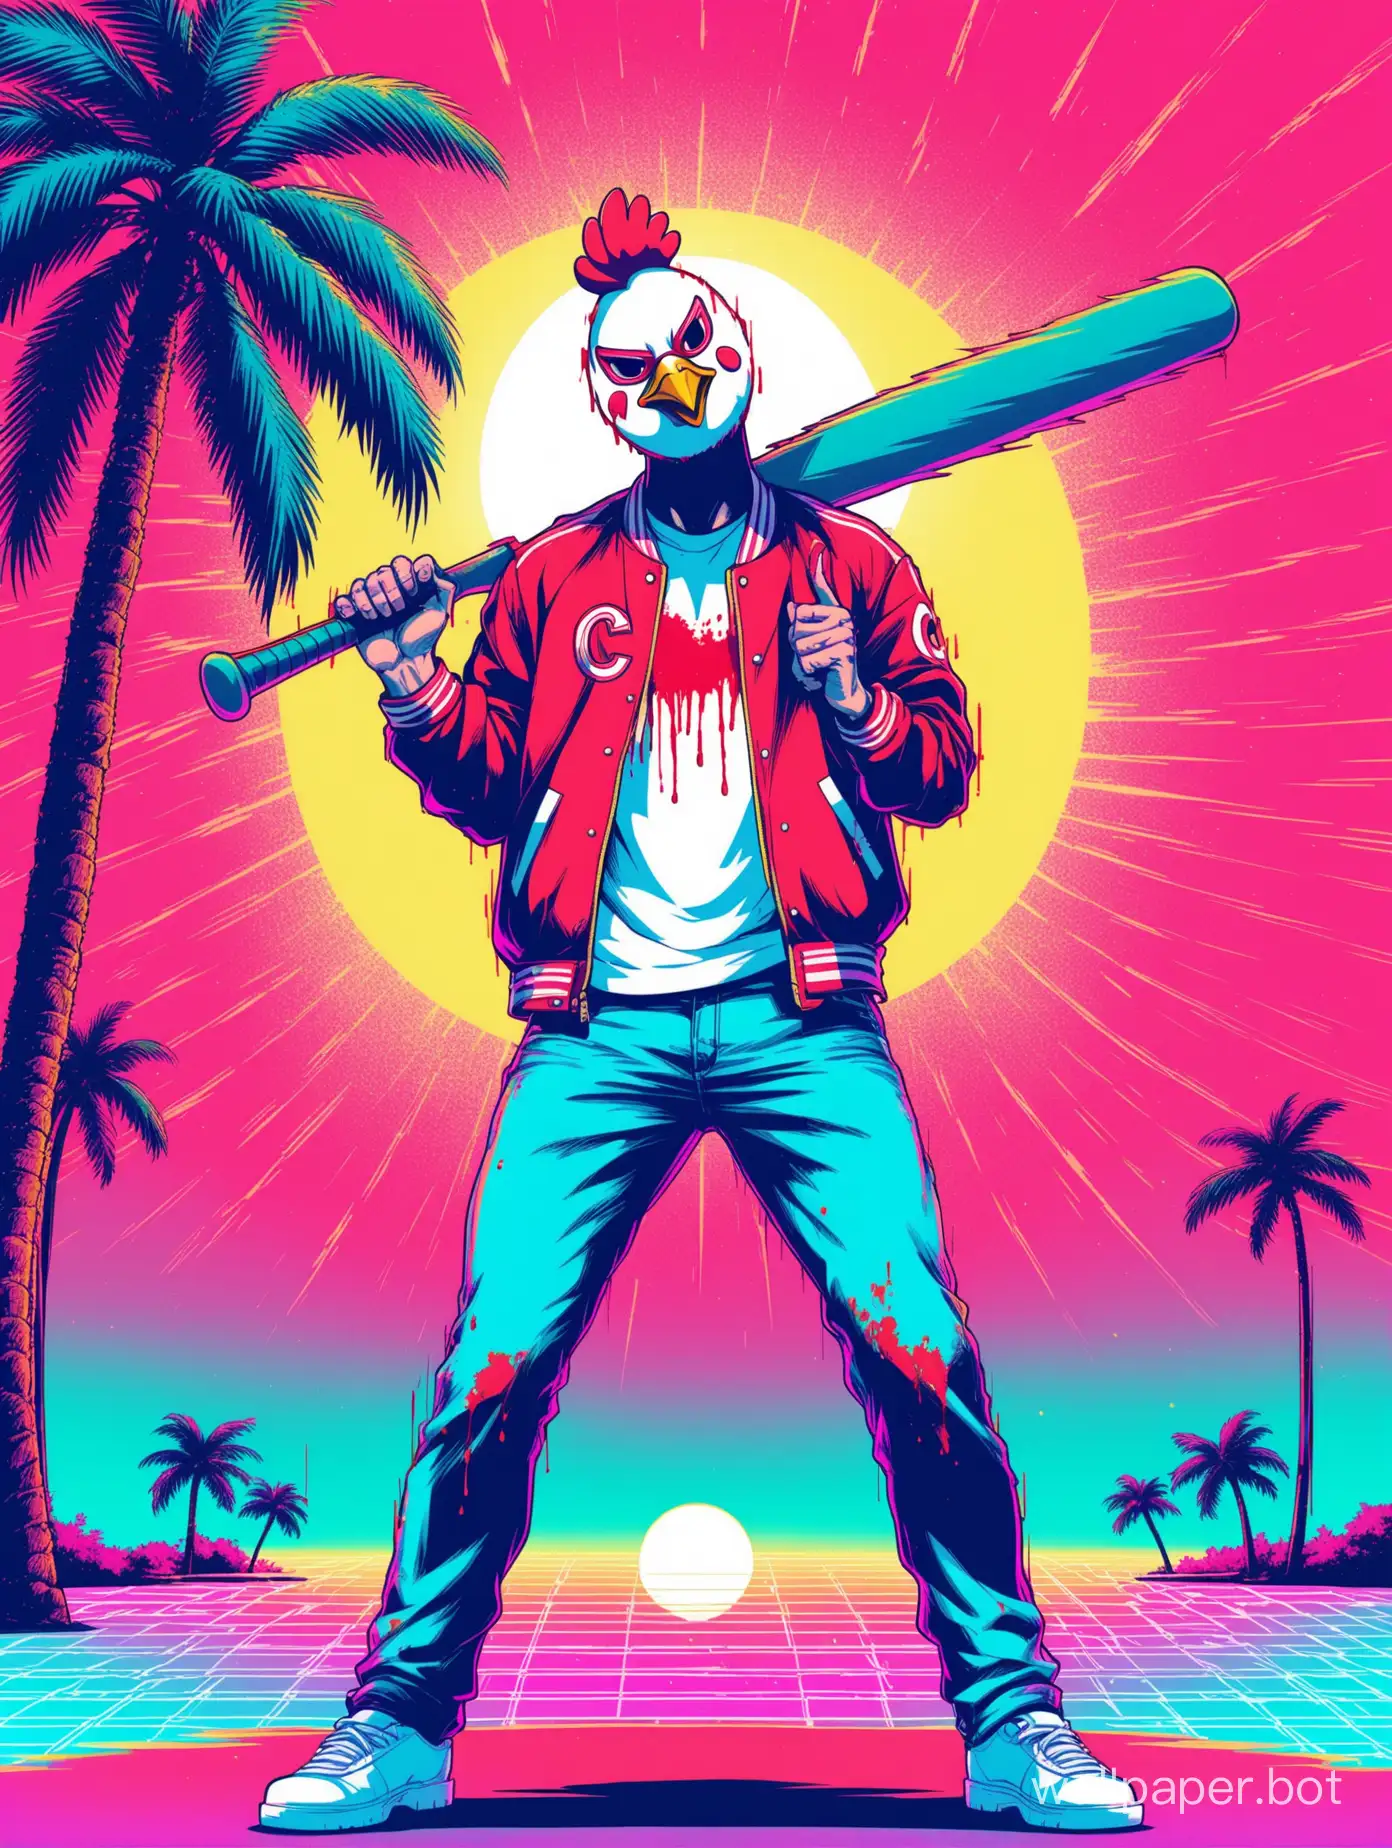 A white guy wearing a chicken mask, jeans, and a varsity football jacket covered in blood and holding a baseball bat standing in front of palm trees vaporwave style